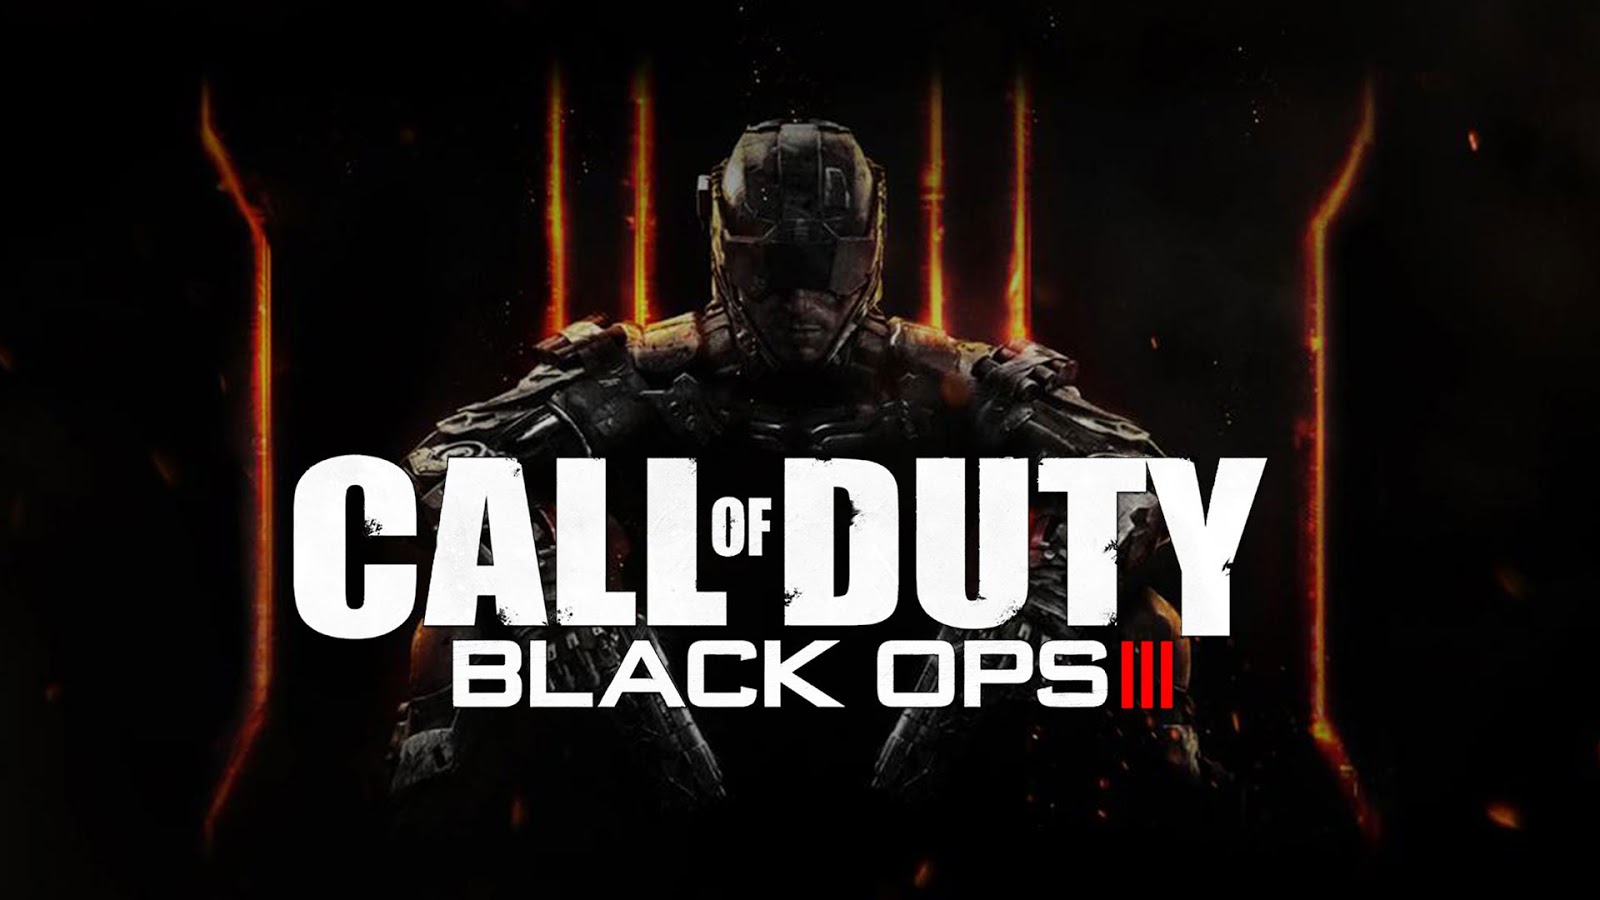 Call Of Duty Black Ops Iii Game Free Download Full Version For Pc